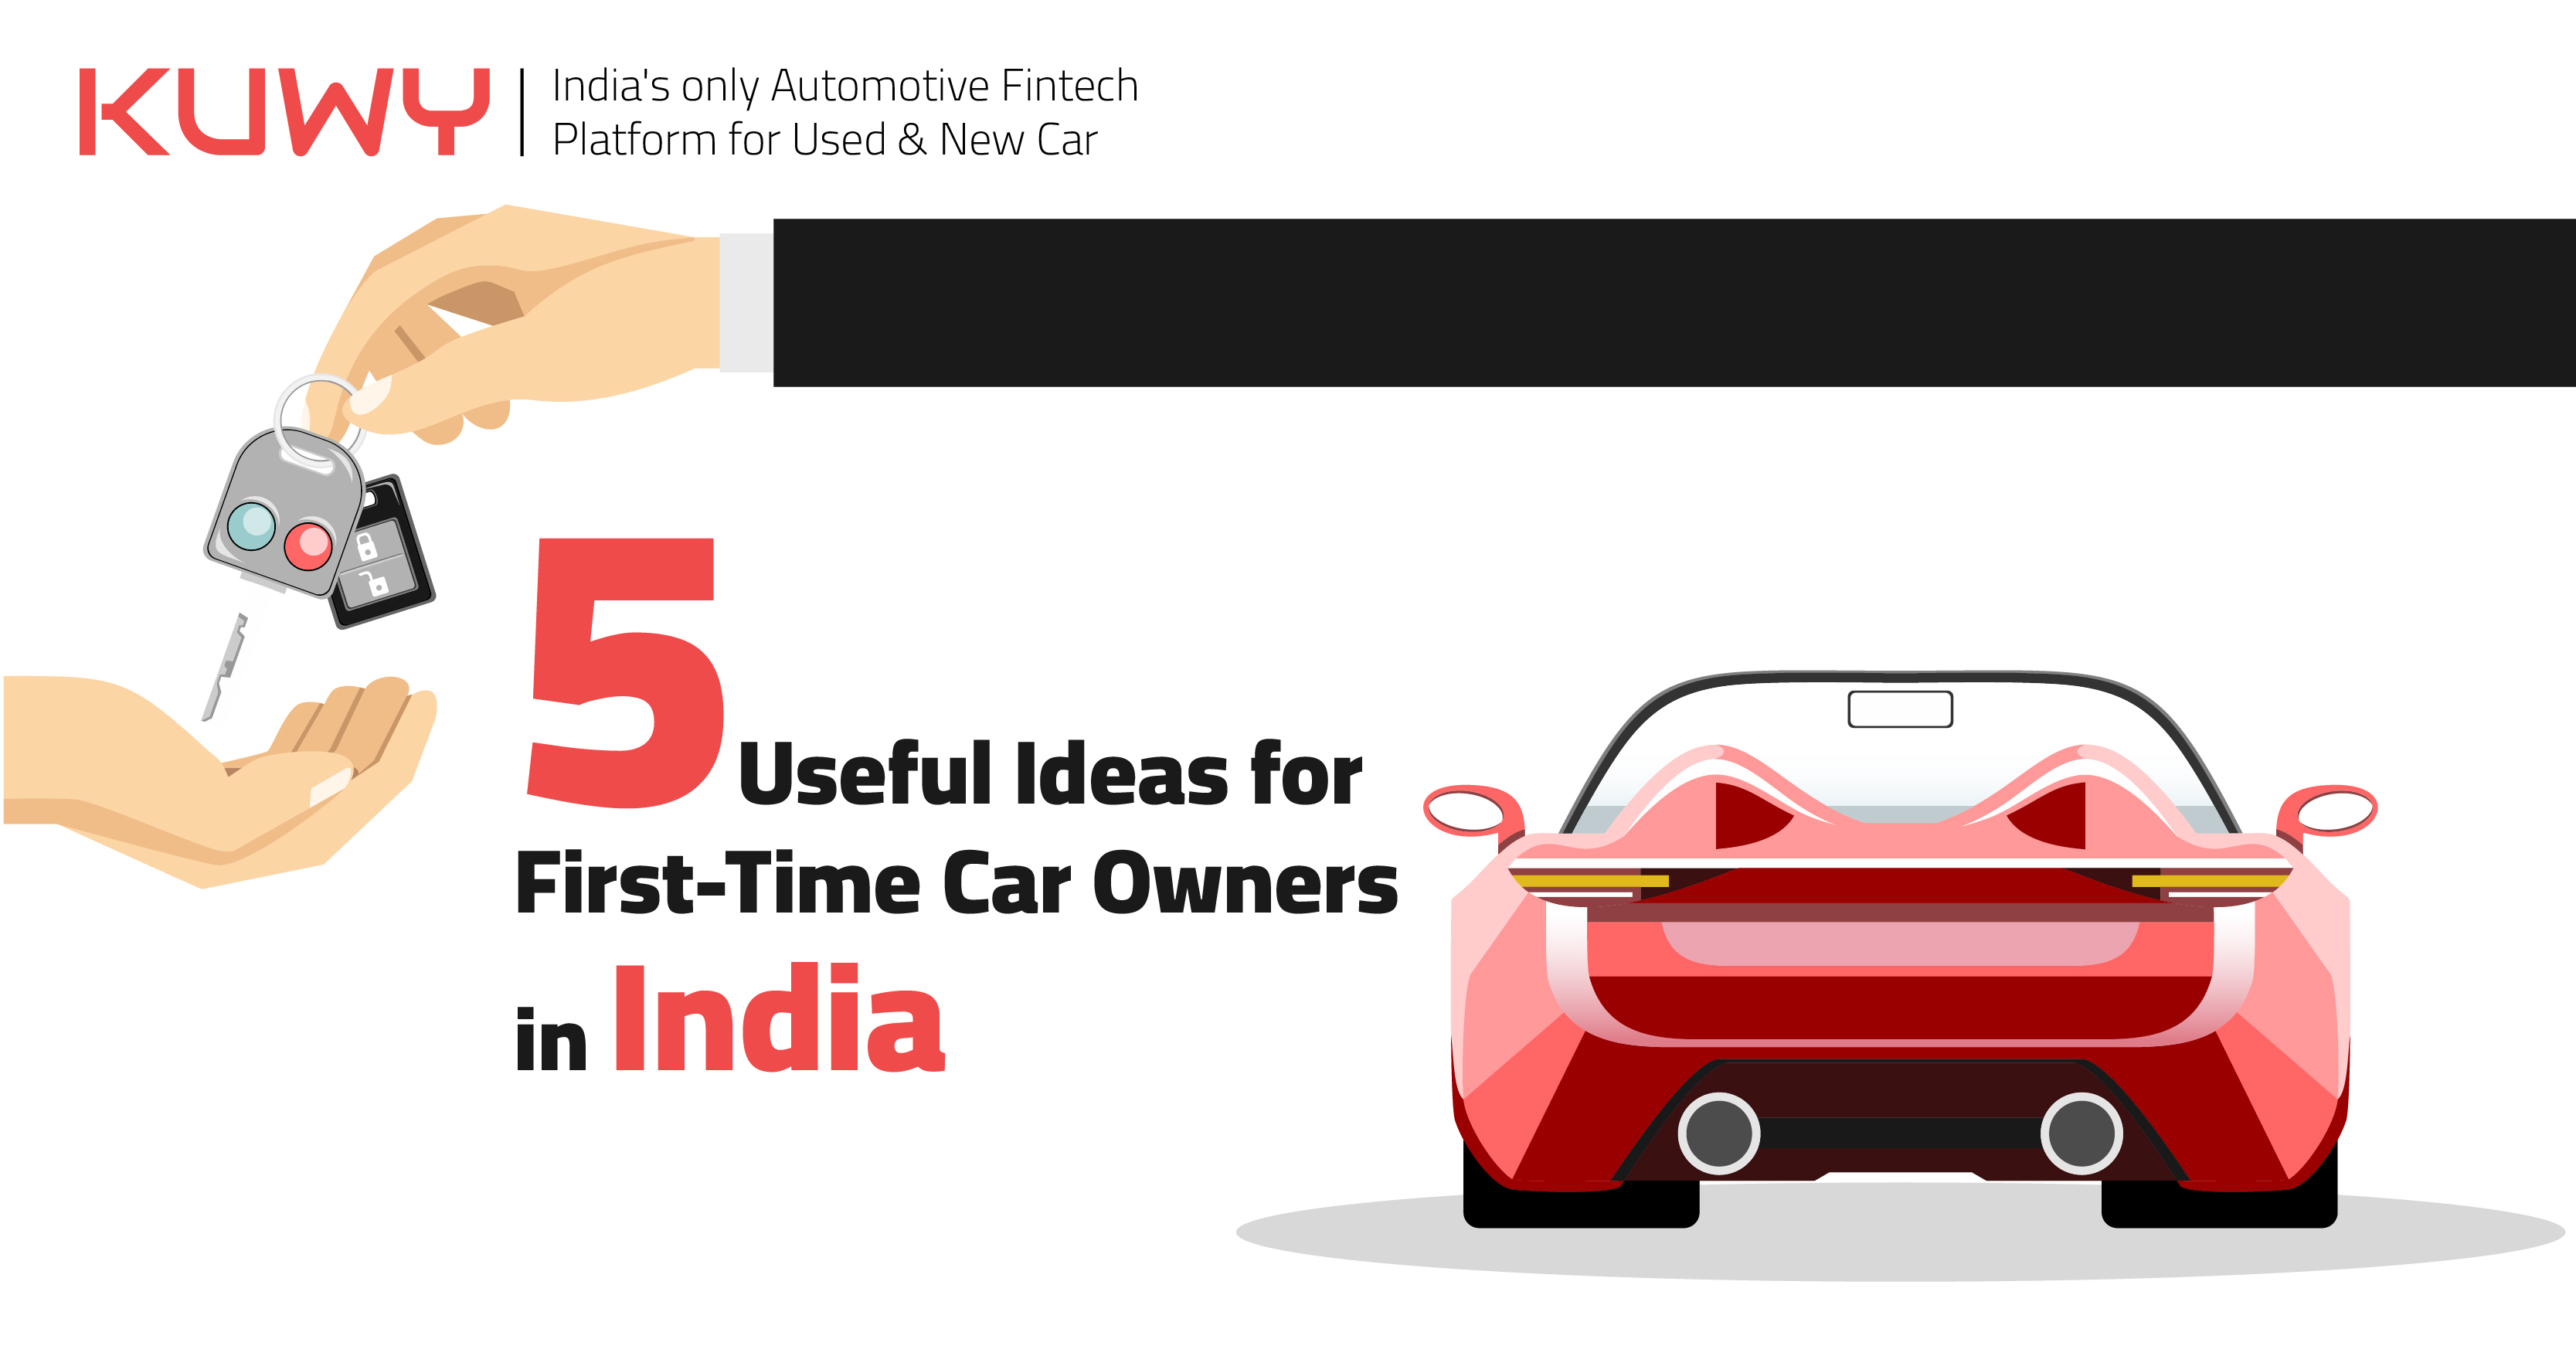 Five Useful Ideas for First-Time Car Owners in India